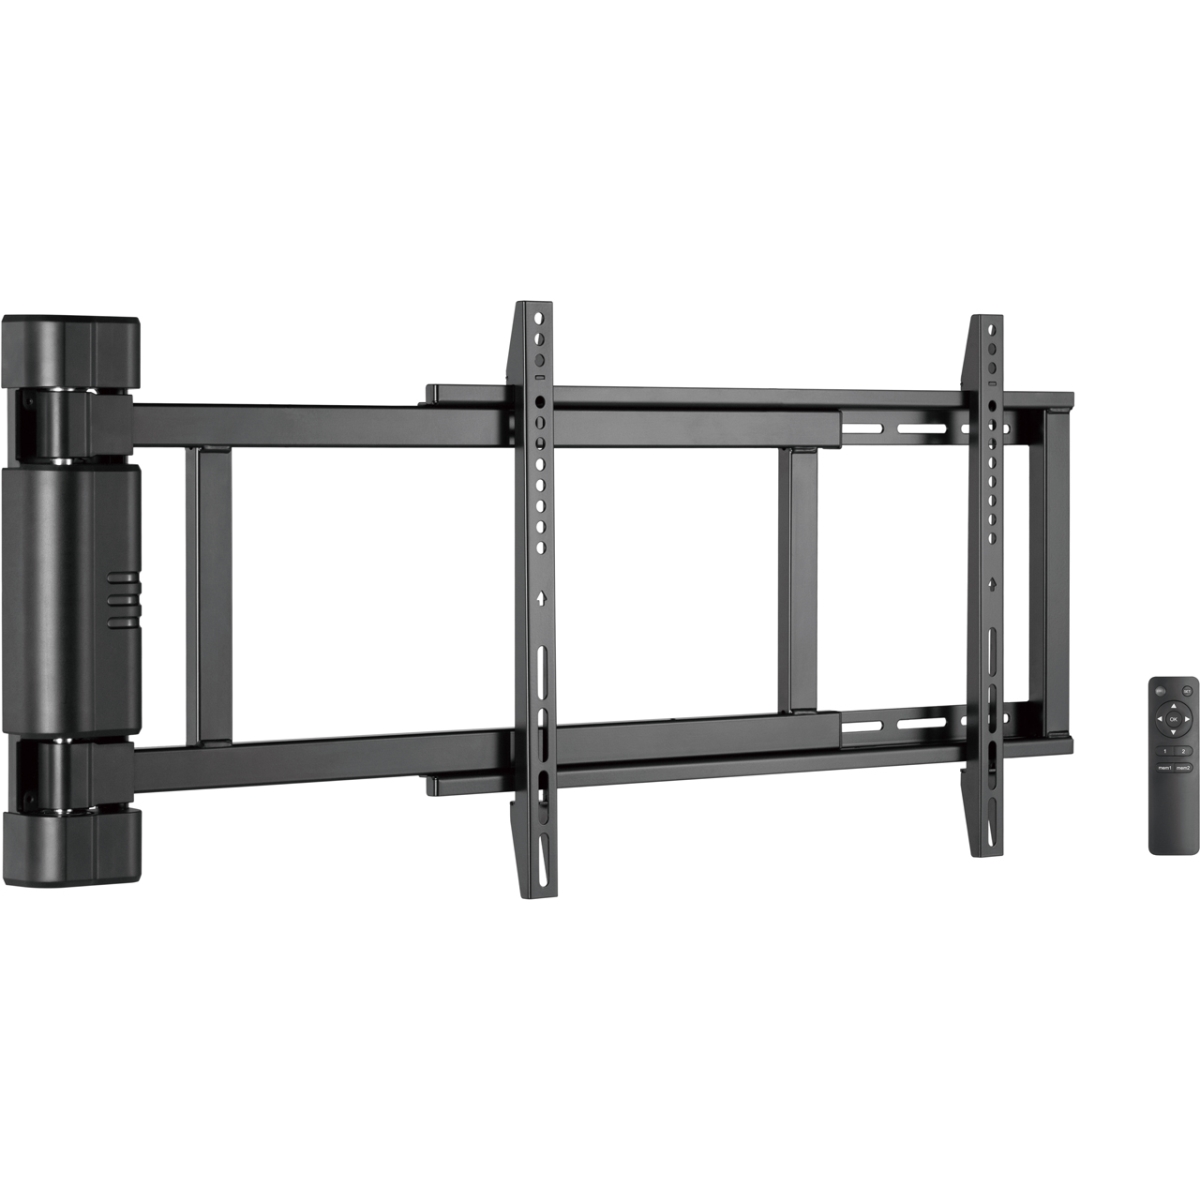 Picture of Scadlock PROM-PMAM6401 Promounts PMAM6401 Motorized Swing TV Wall Mount for TVs 32 to 75 in. - Supports Up to 110 lbs